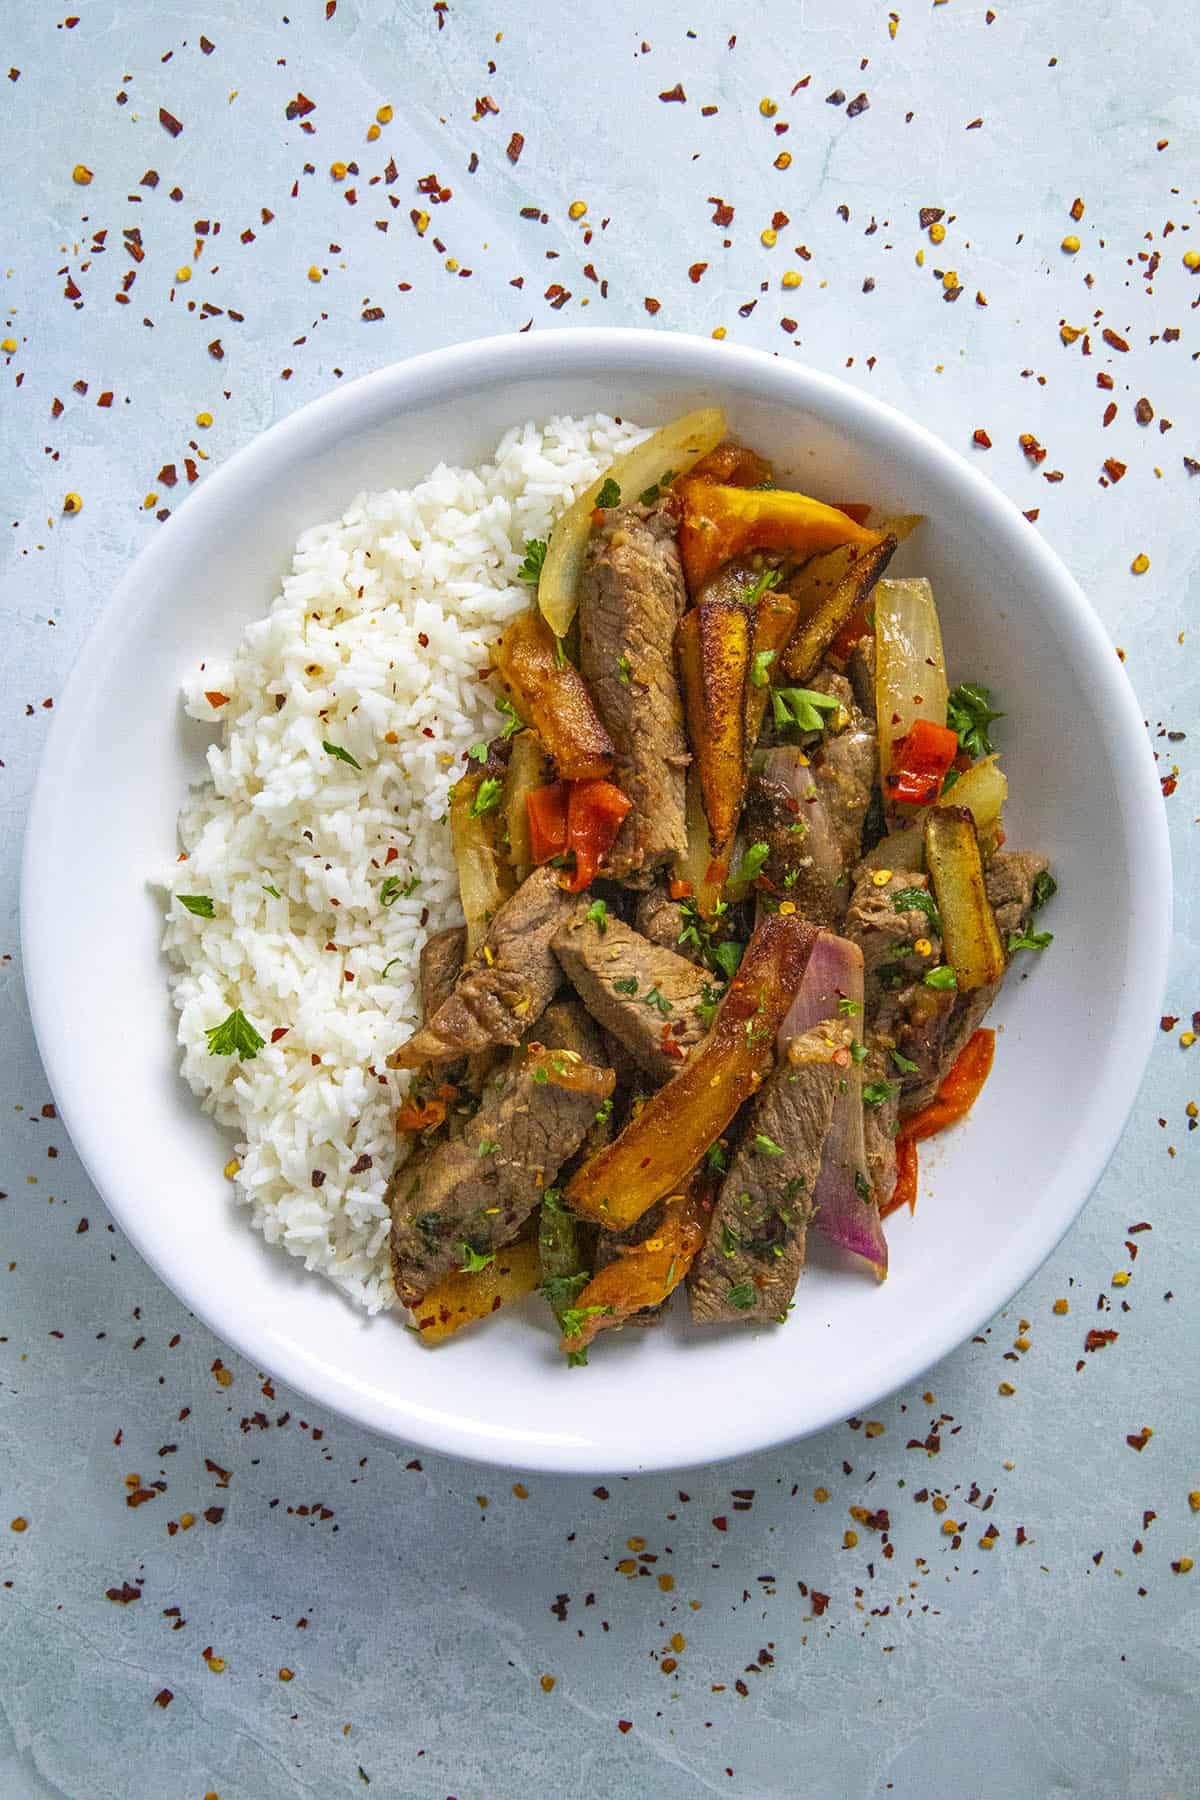 Peruvian Beef Stir Fry with French Fries (Lomo Saltado) in a bow over rice